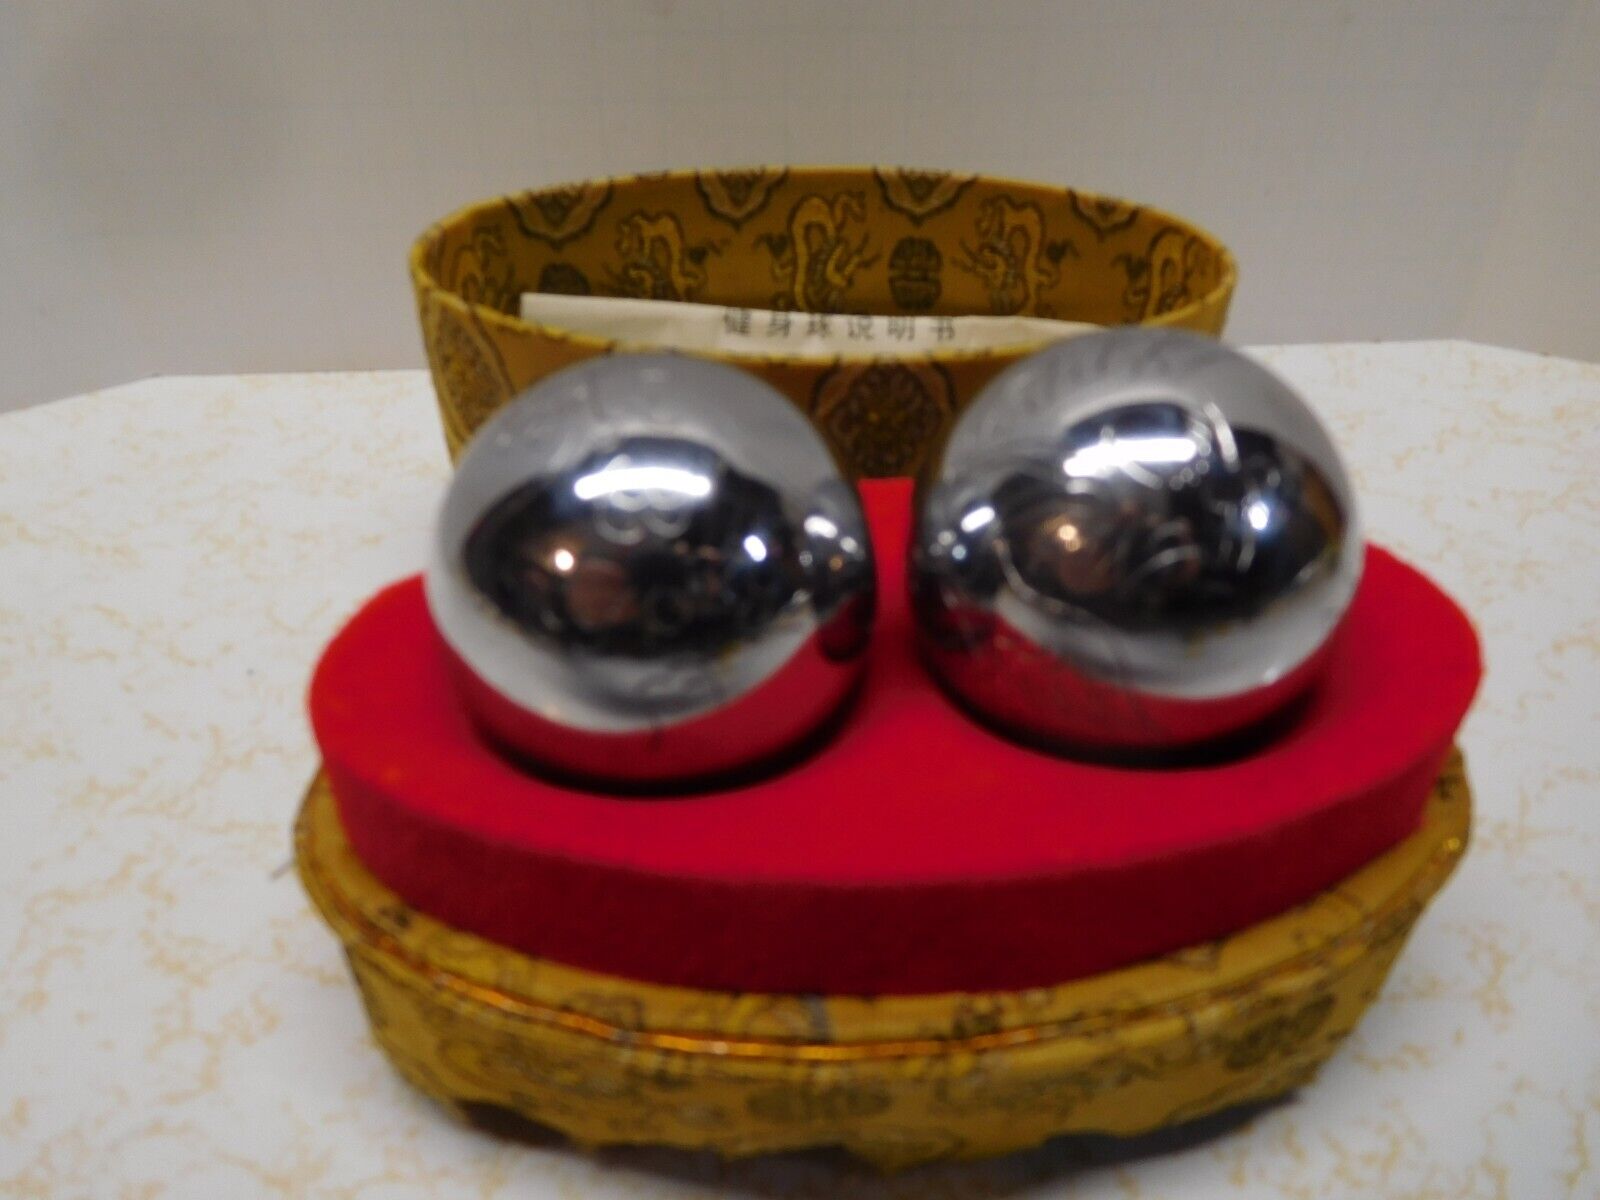 Vintage Heaithy Bail Chinese Therapy Engraved Metal Balls w/ Bells in Oval Case